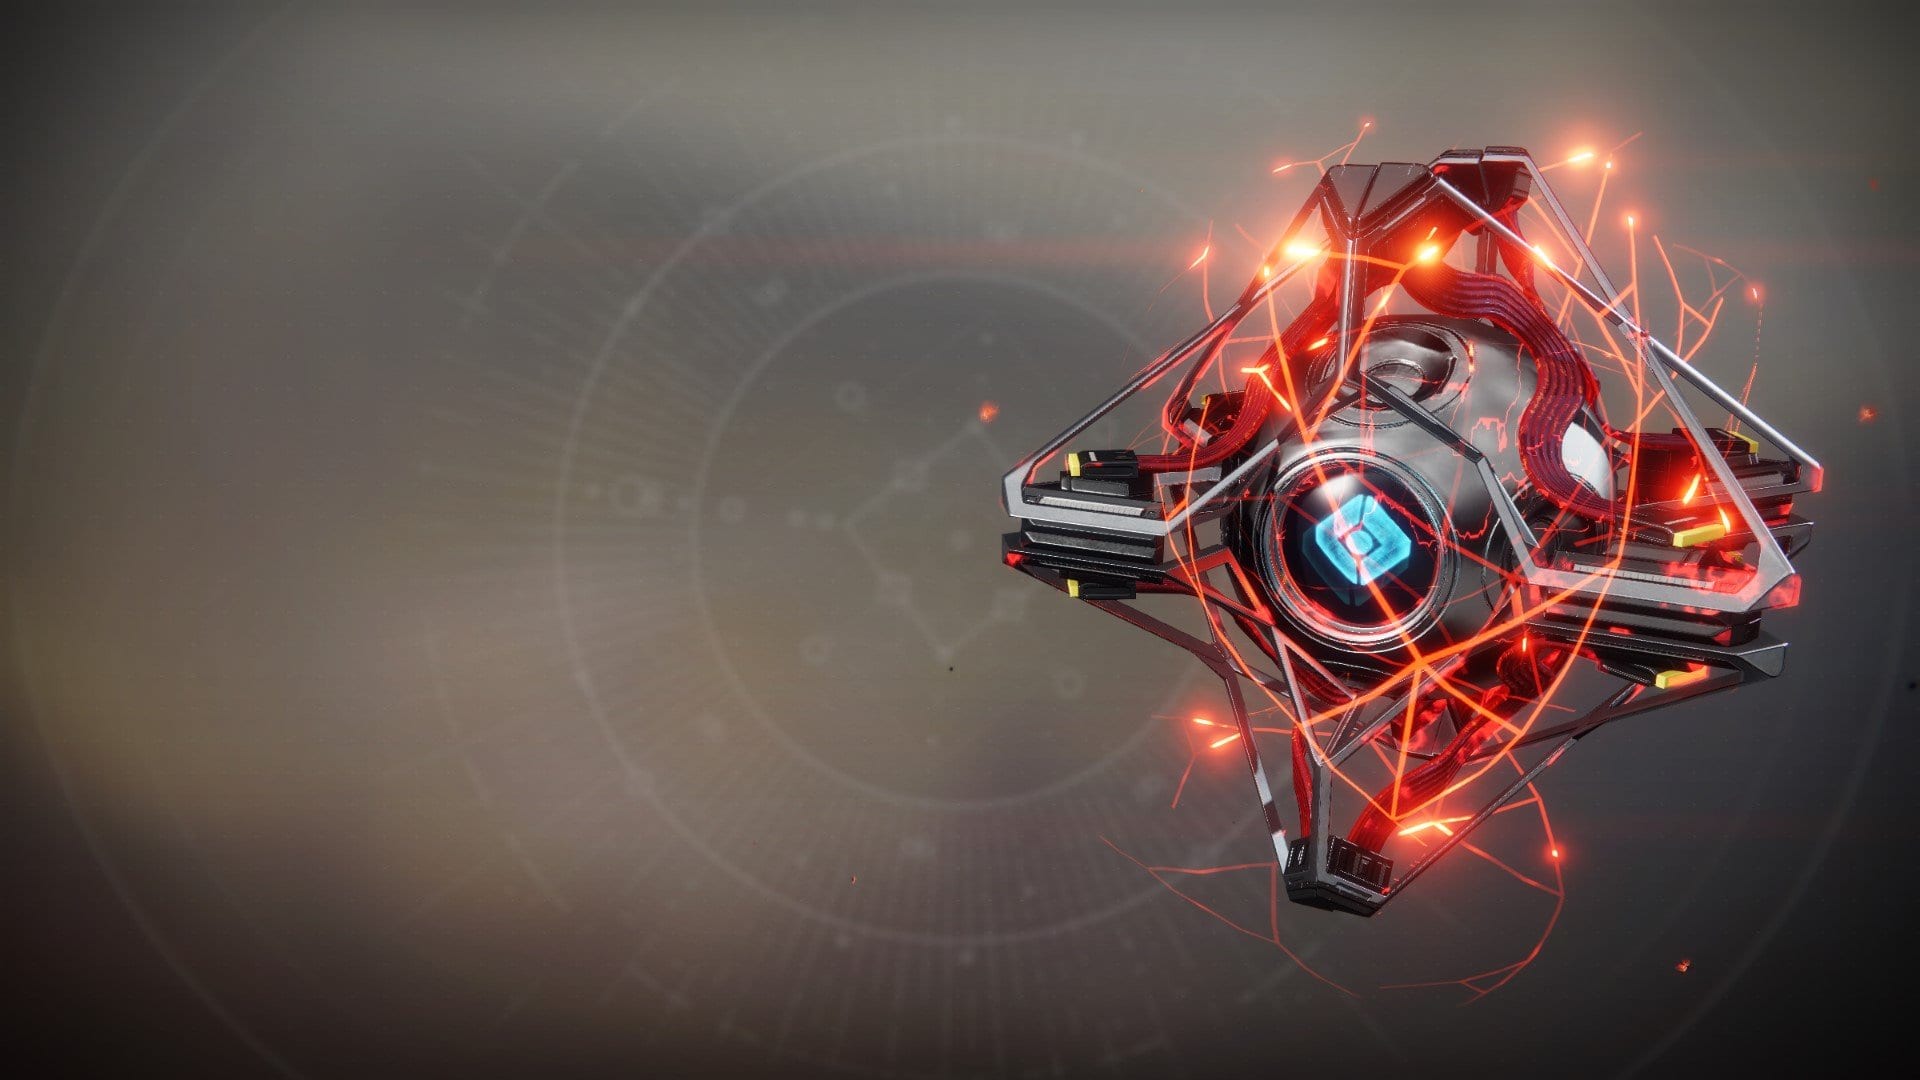 Destiny 2: How to Get Hardlink Shell Free Ghost Skin